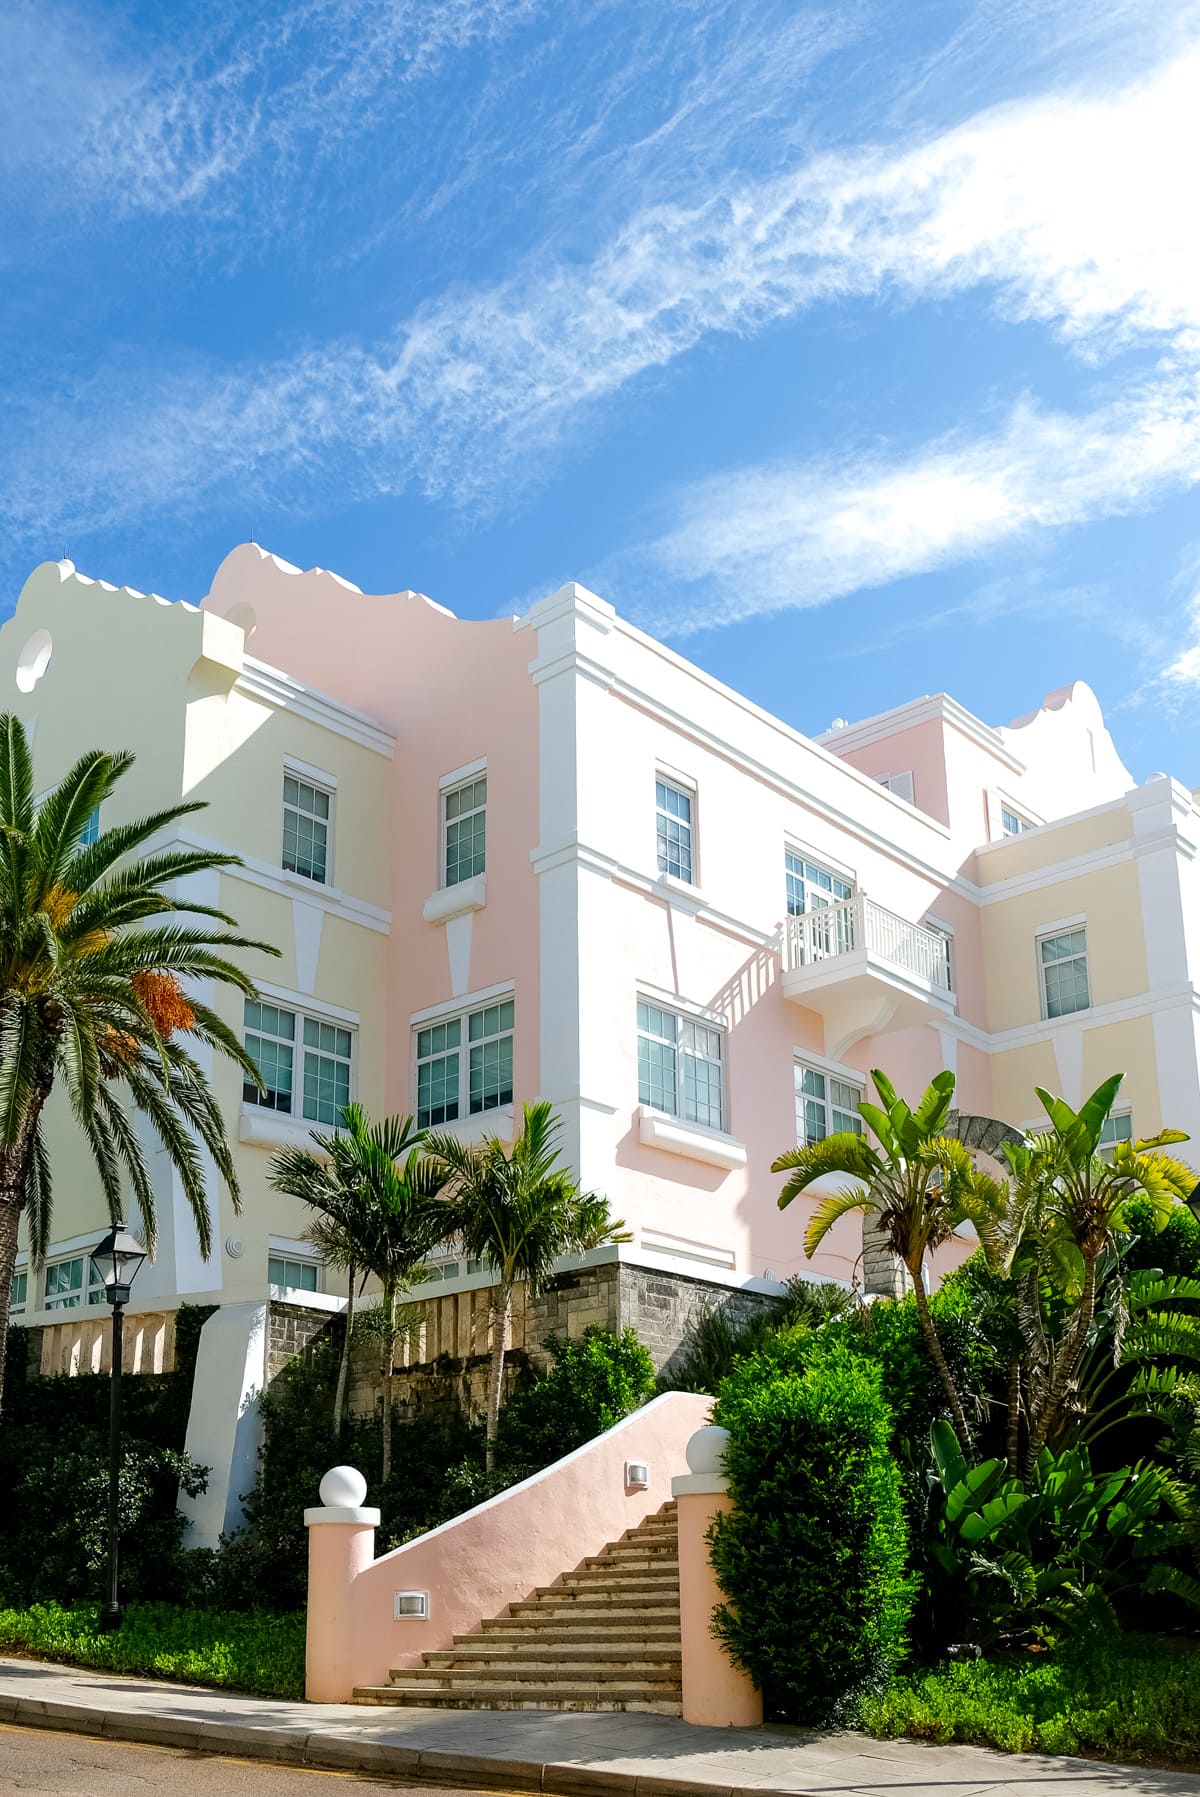 Our travel guide Hamilton, Bermuda and The Hamilton Princess Fairmont by top Houston lifestyle blogger Ashley Rose of Sugar and Cloth